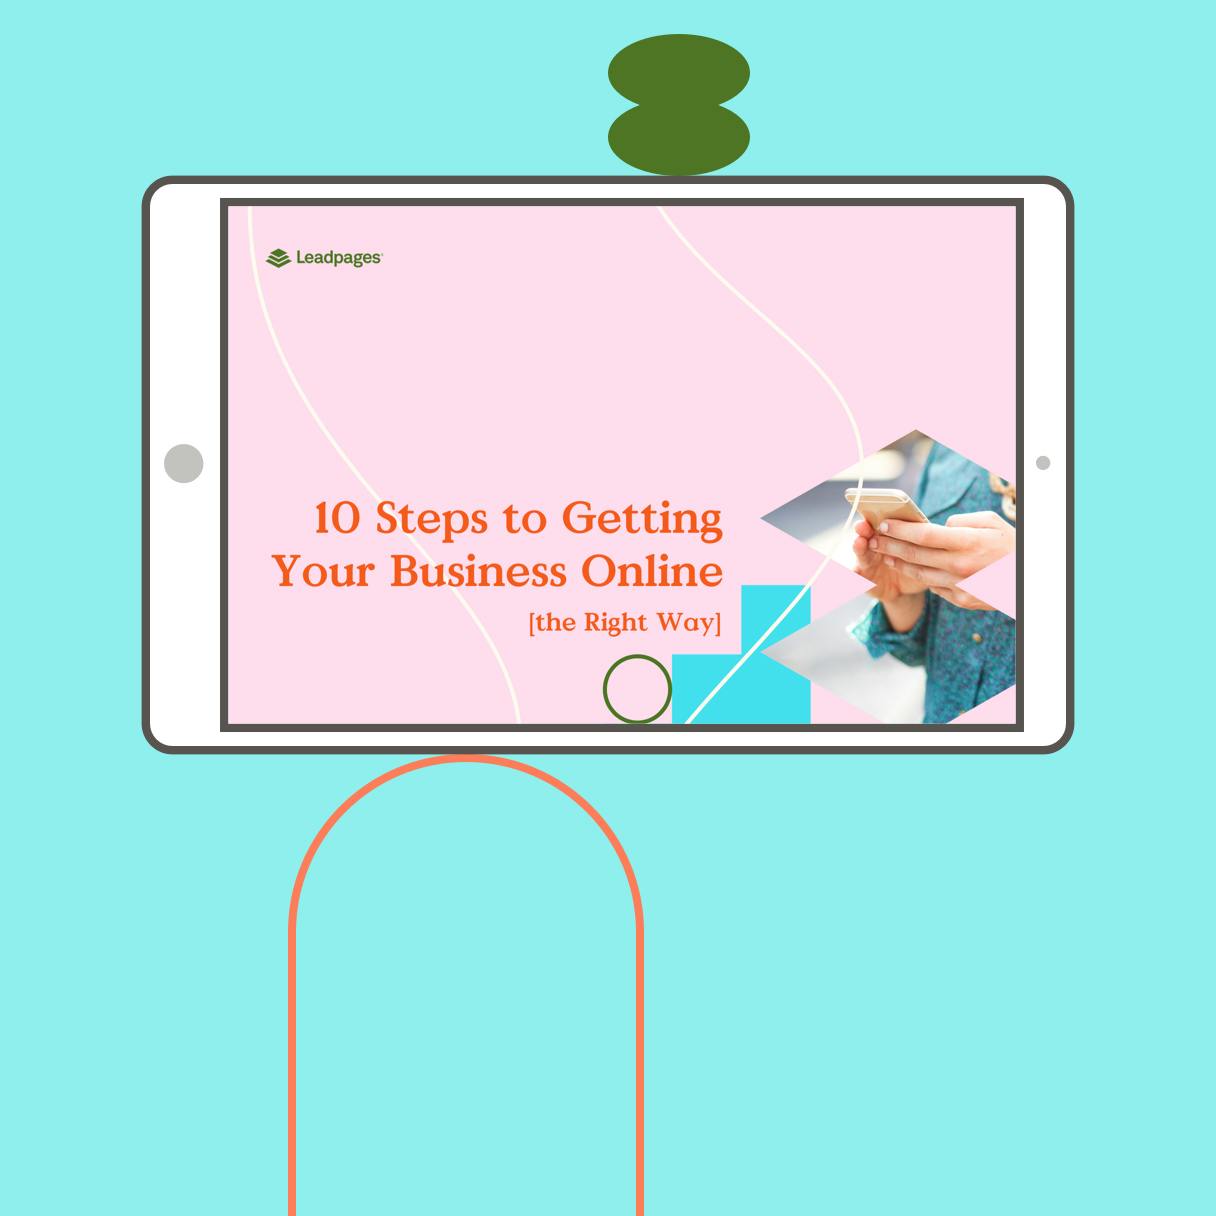 10 Steps to Getting Your Business Online